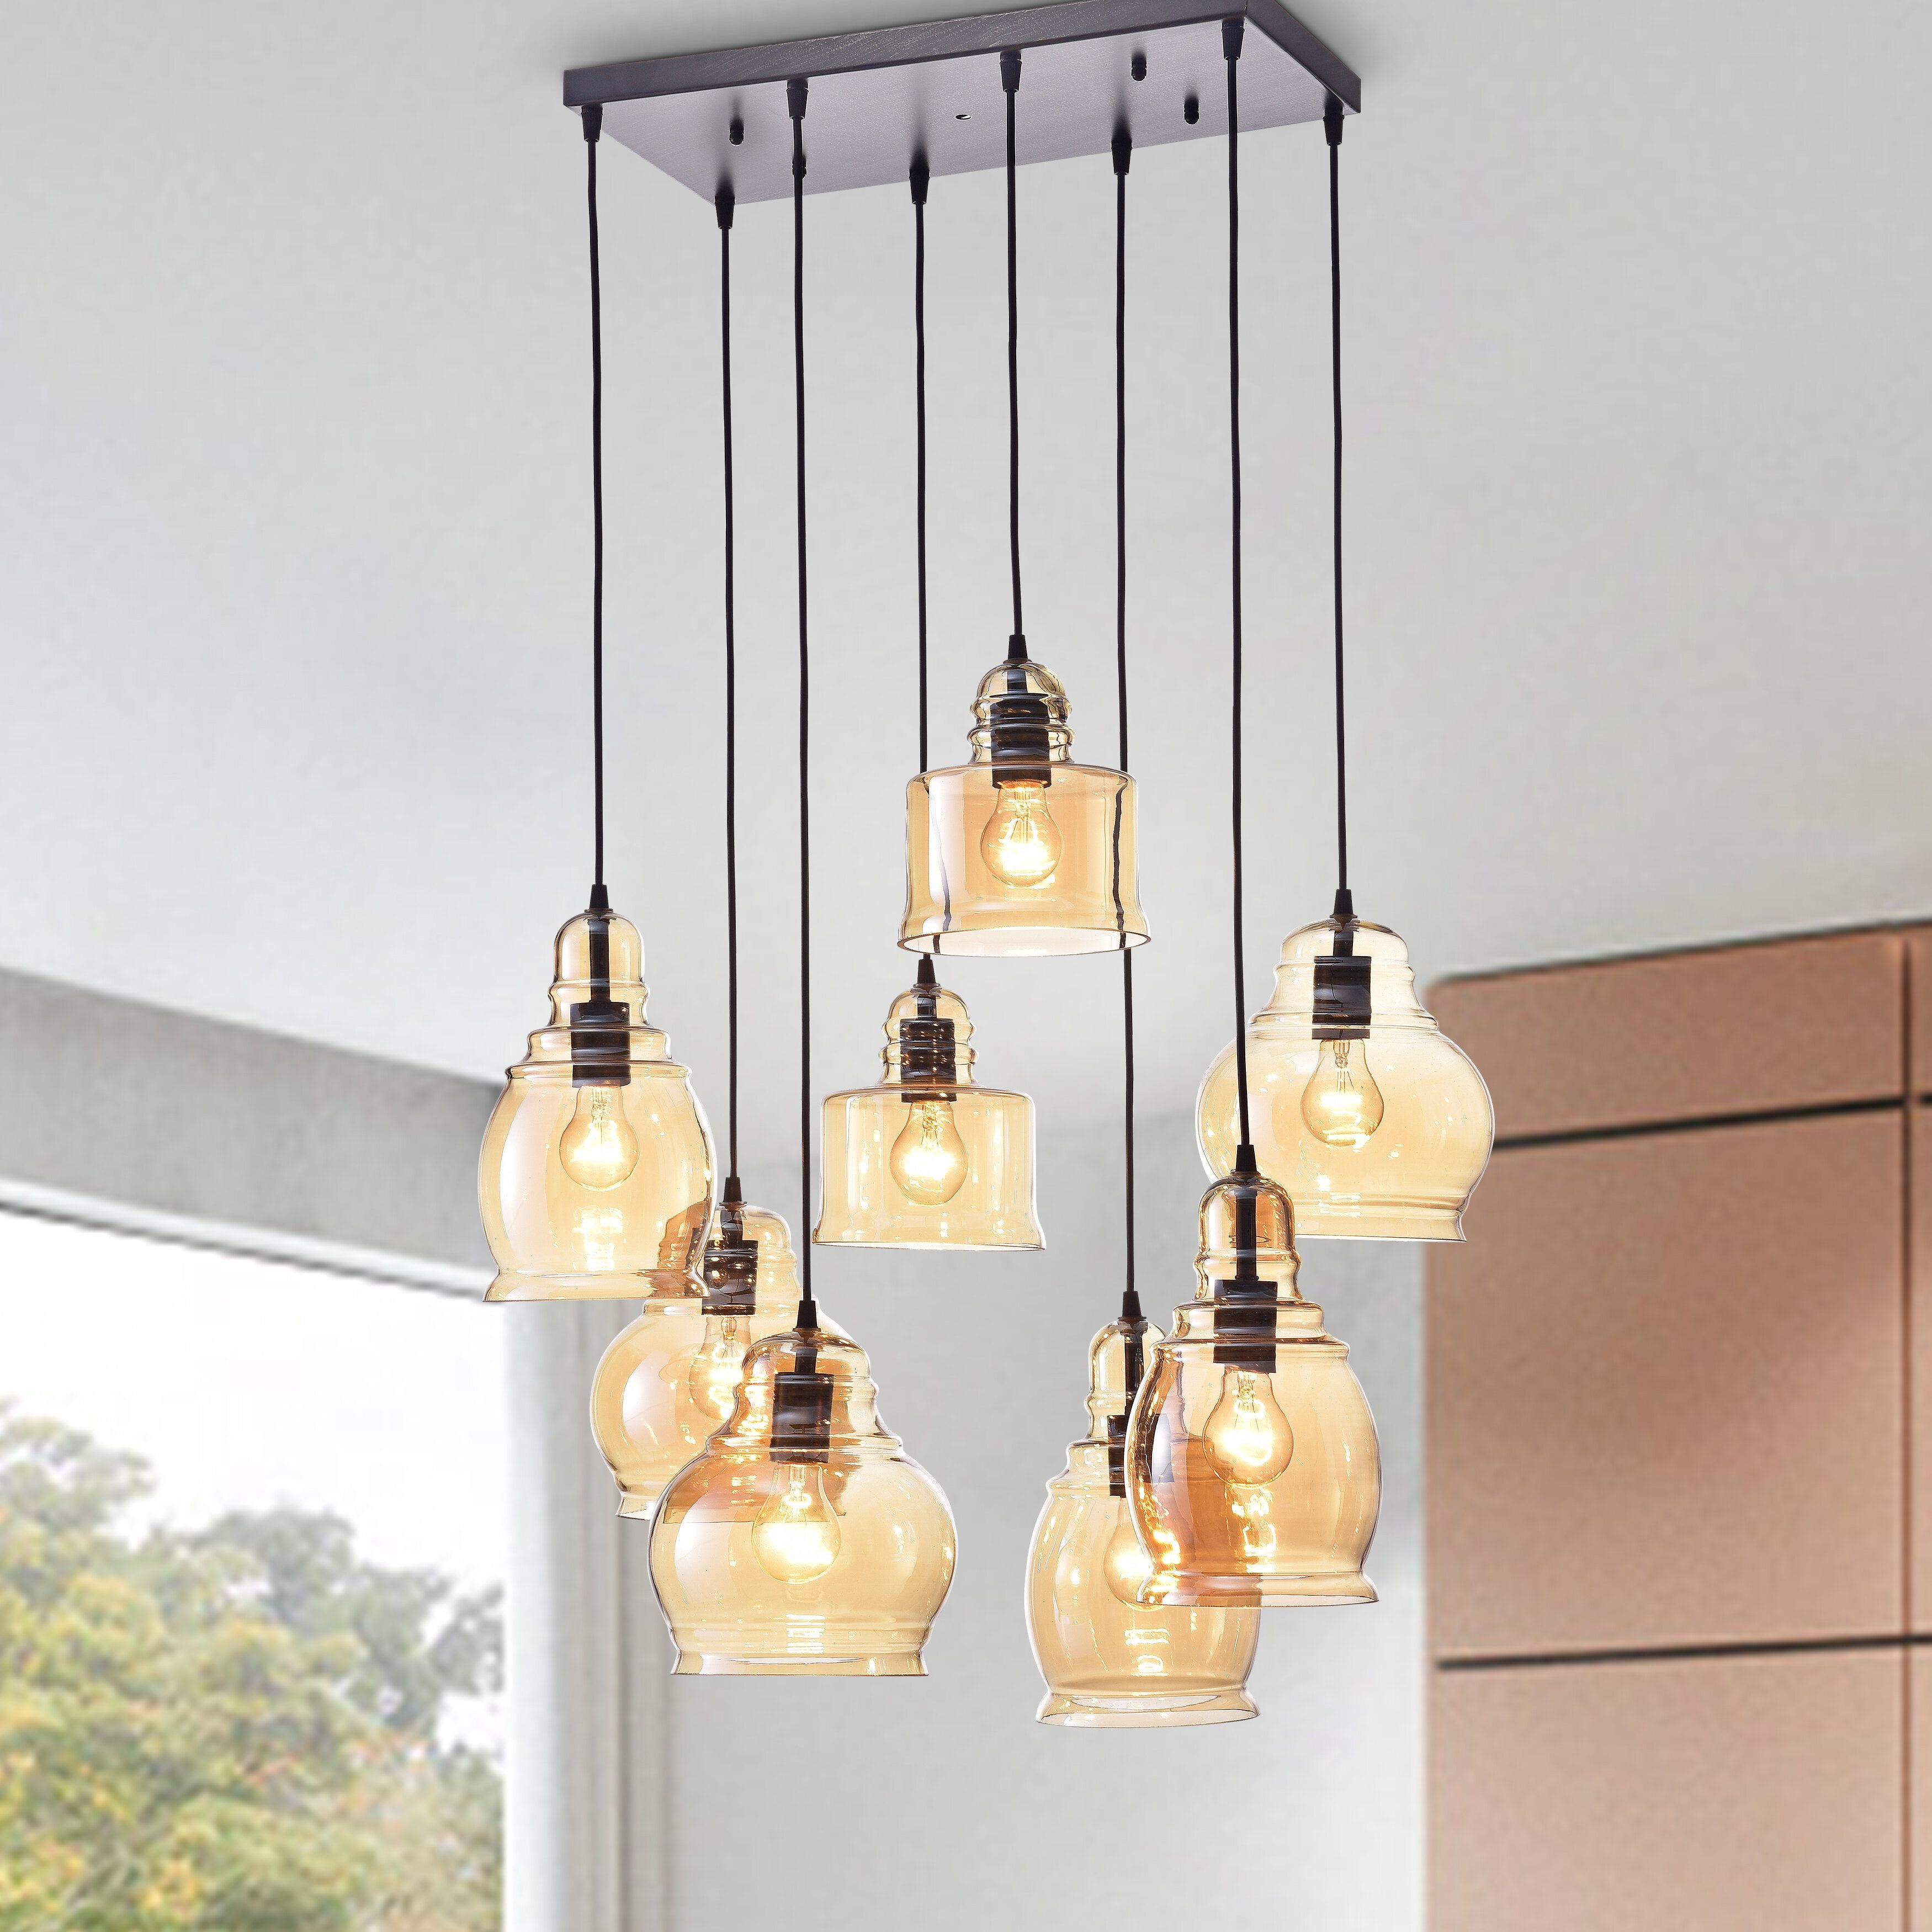 Bell Shaped Pendant Light You'll Love In 2019 | Wayfair For Terry 1 Light Single Bell Pendants (View 30 of 30)